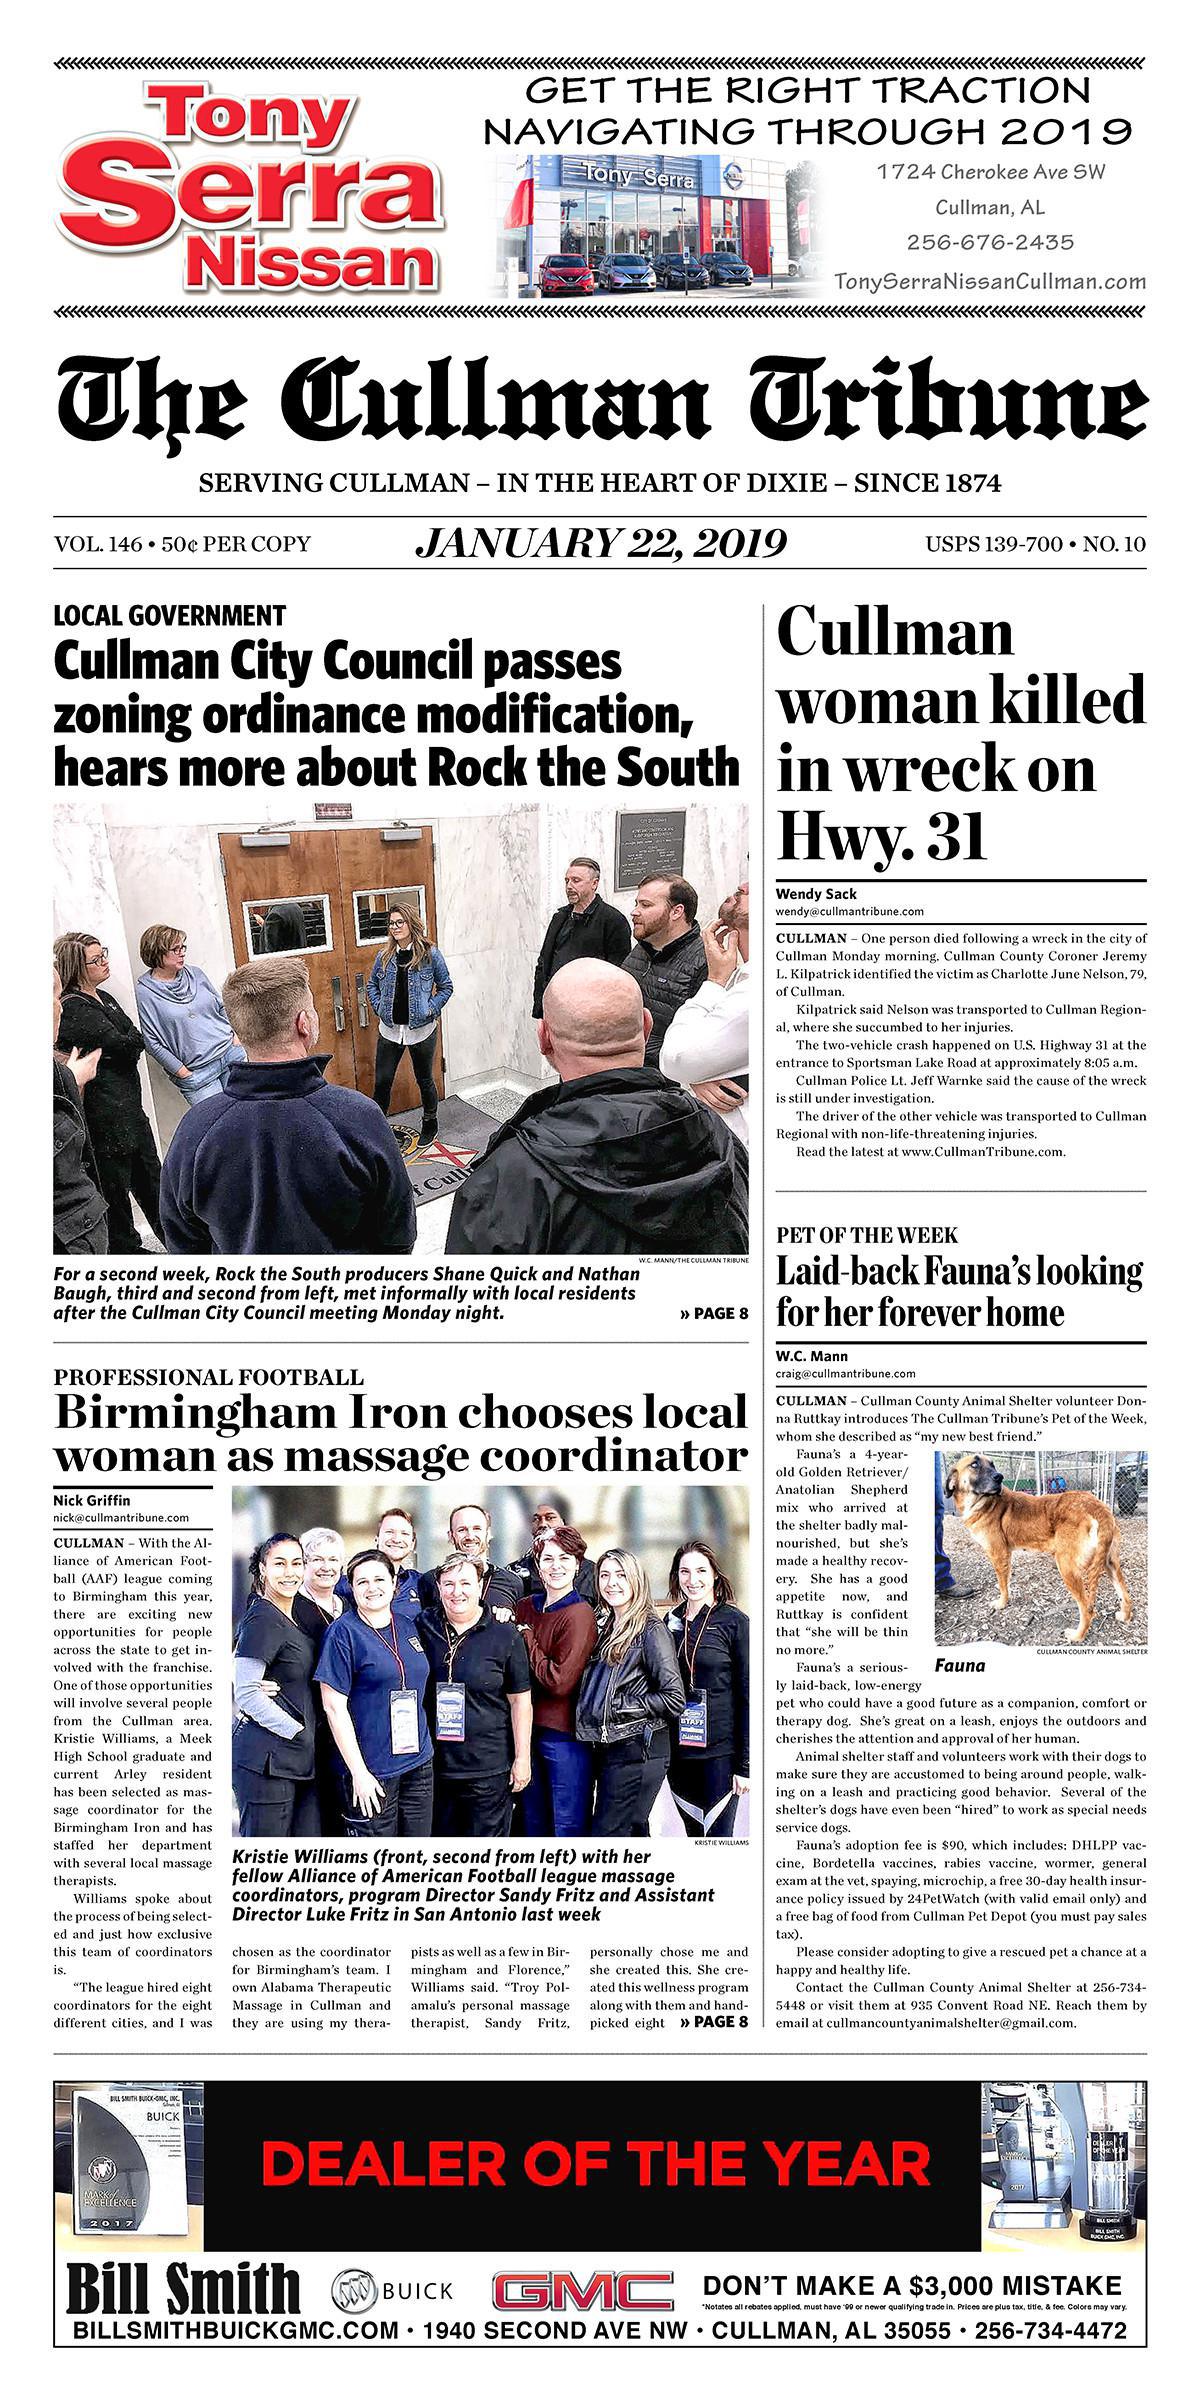 Good Morning Cullman! The 01-22-2019 edition of the Cullman Tribune is now ready to view